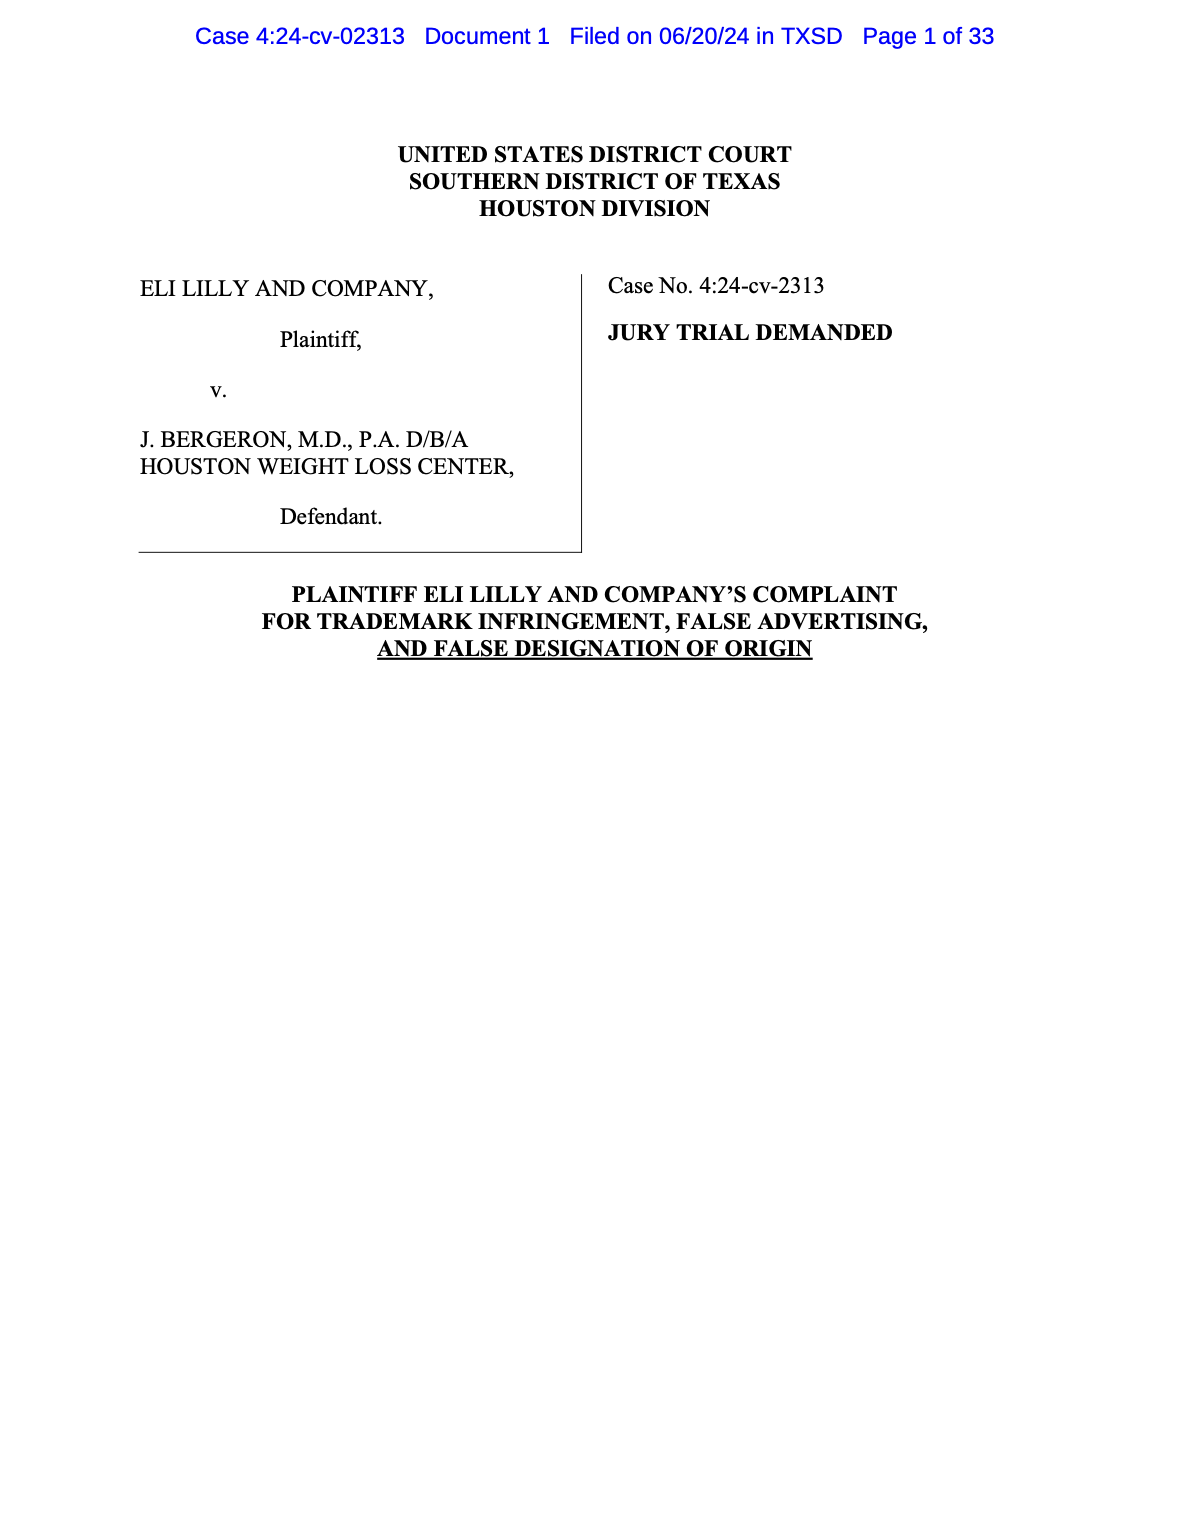 <a href="https://www.safemedicines.org/wp-content/uploads/2019/09/Eli-Lilly-v-J-Bergeron-Complaint.pdf">Eli Lilly v Houston Weight Loss Center </a><br>Filed in Texas, June 20, 2024